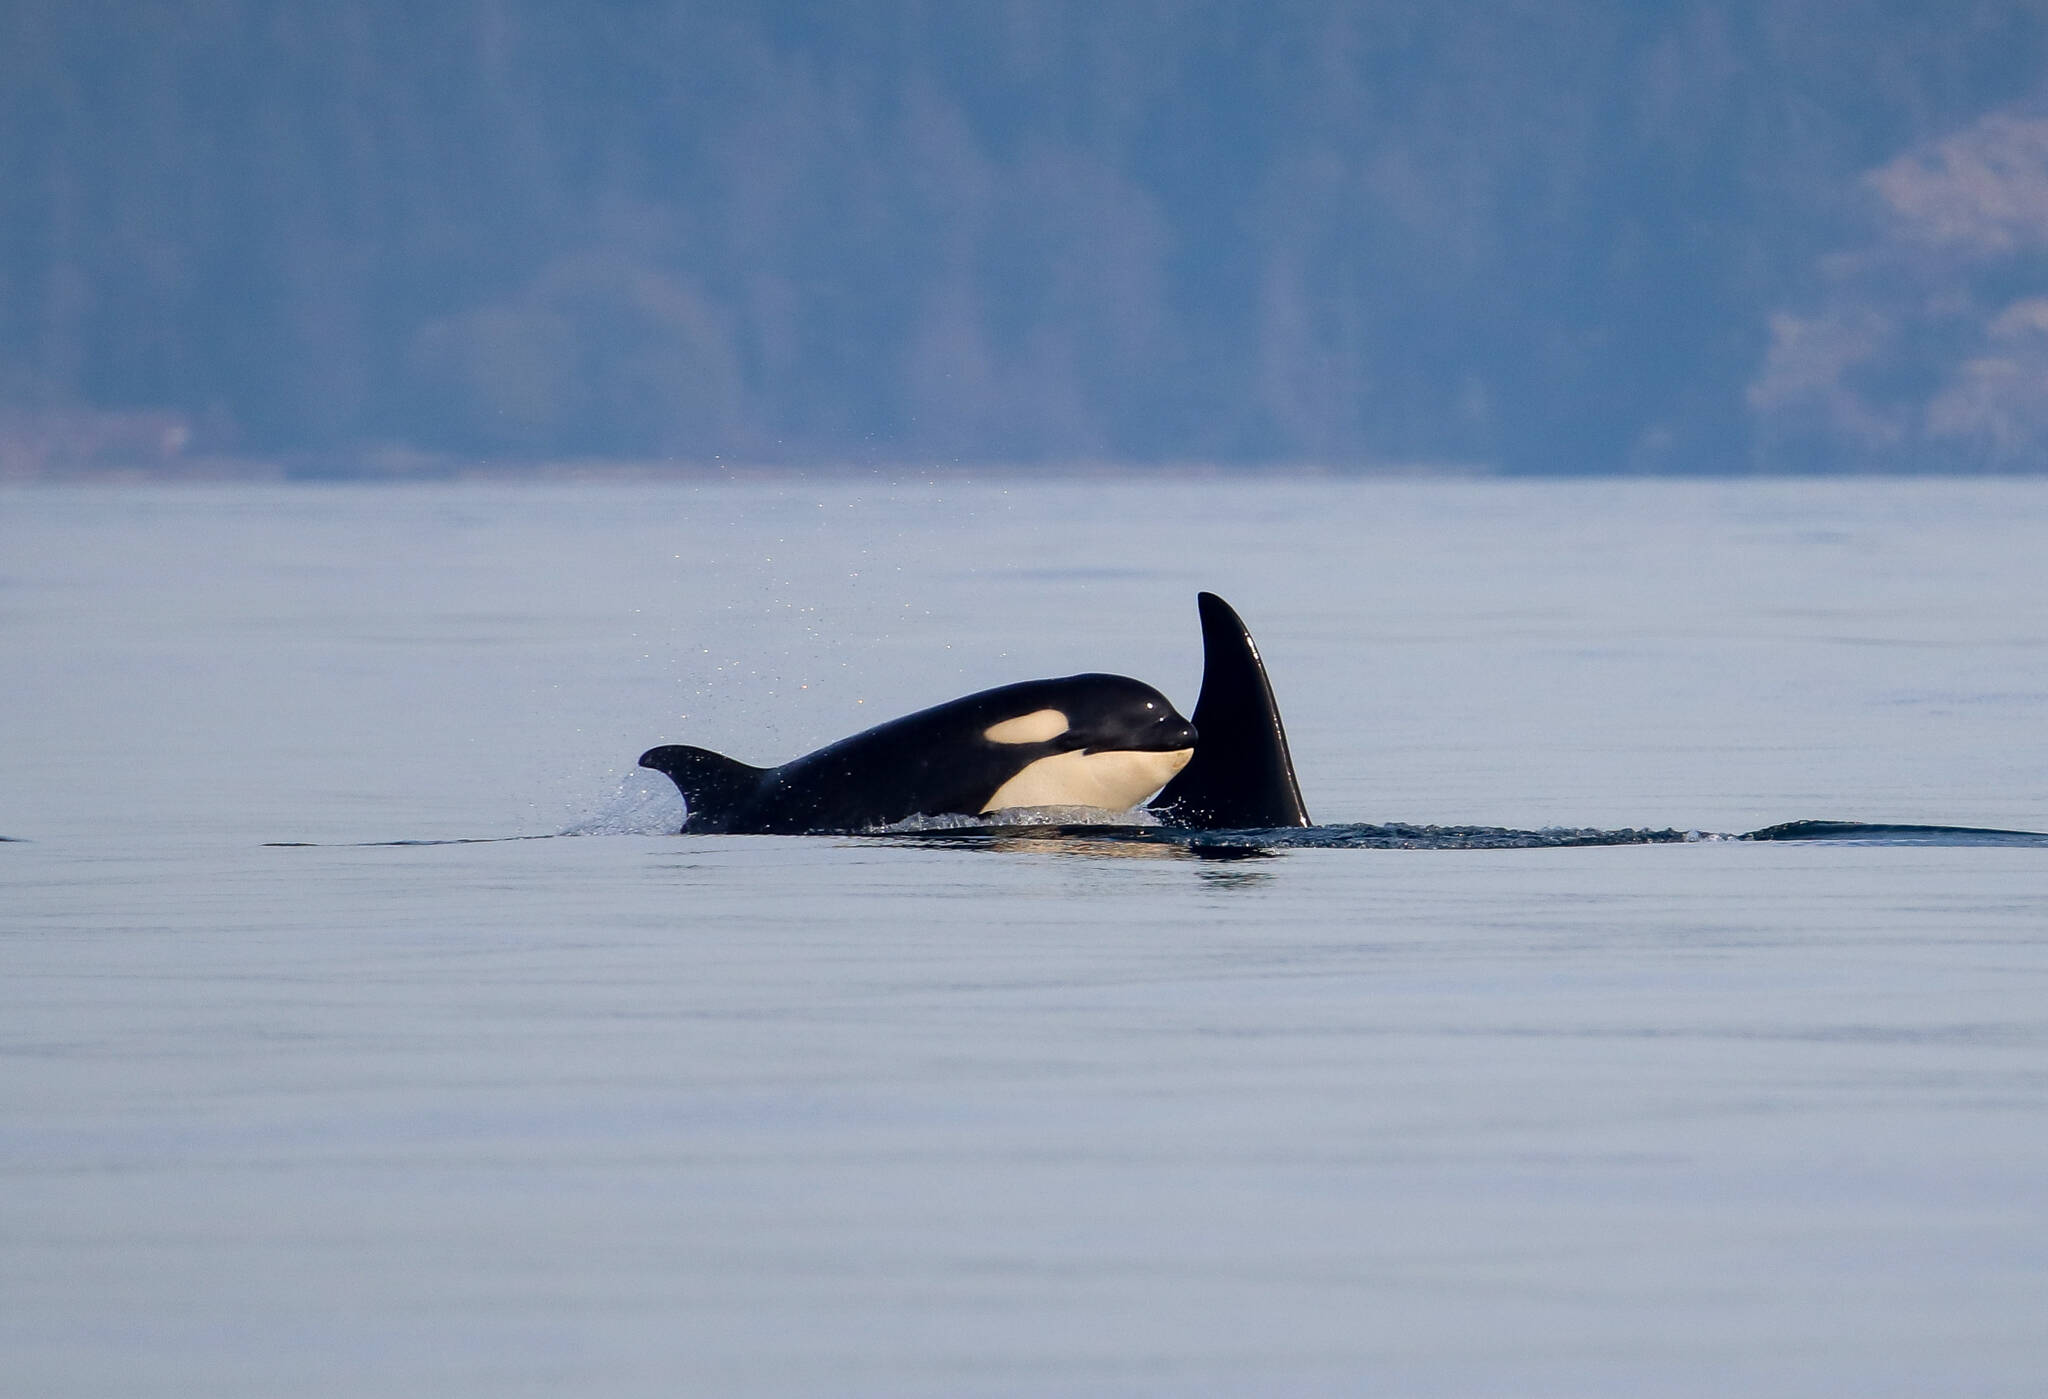 J37 “Hy’Shqa” with her calf, J59. (Photo by Orca Network)